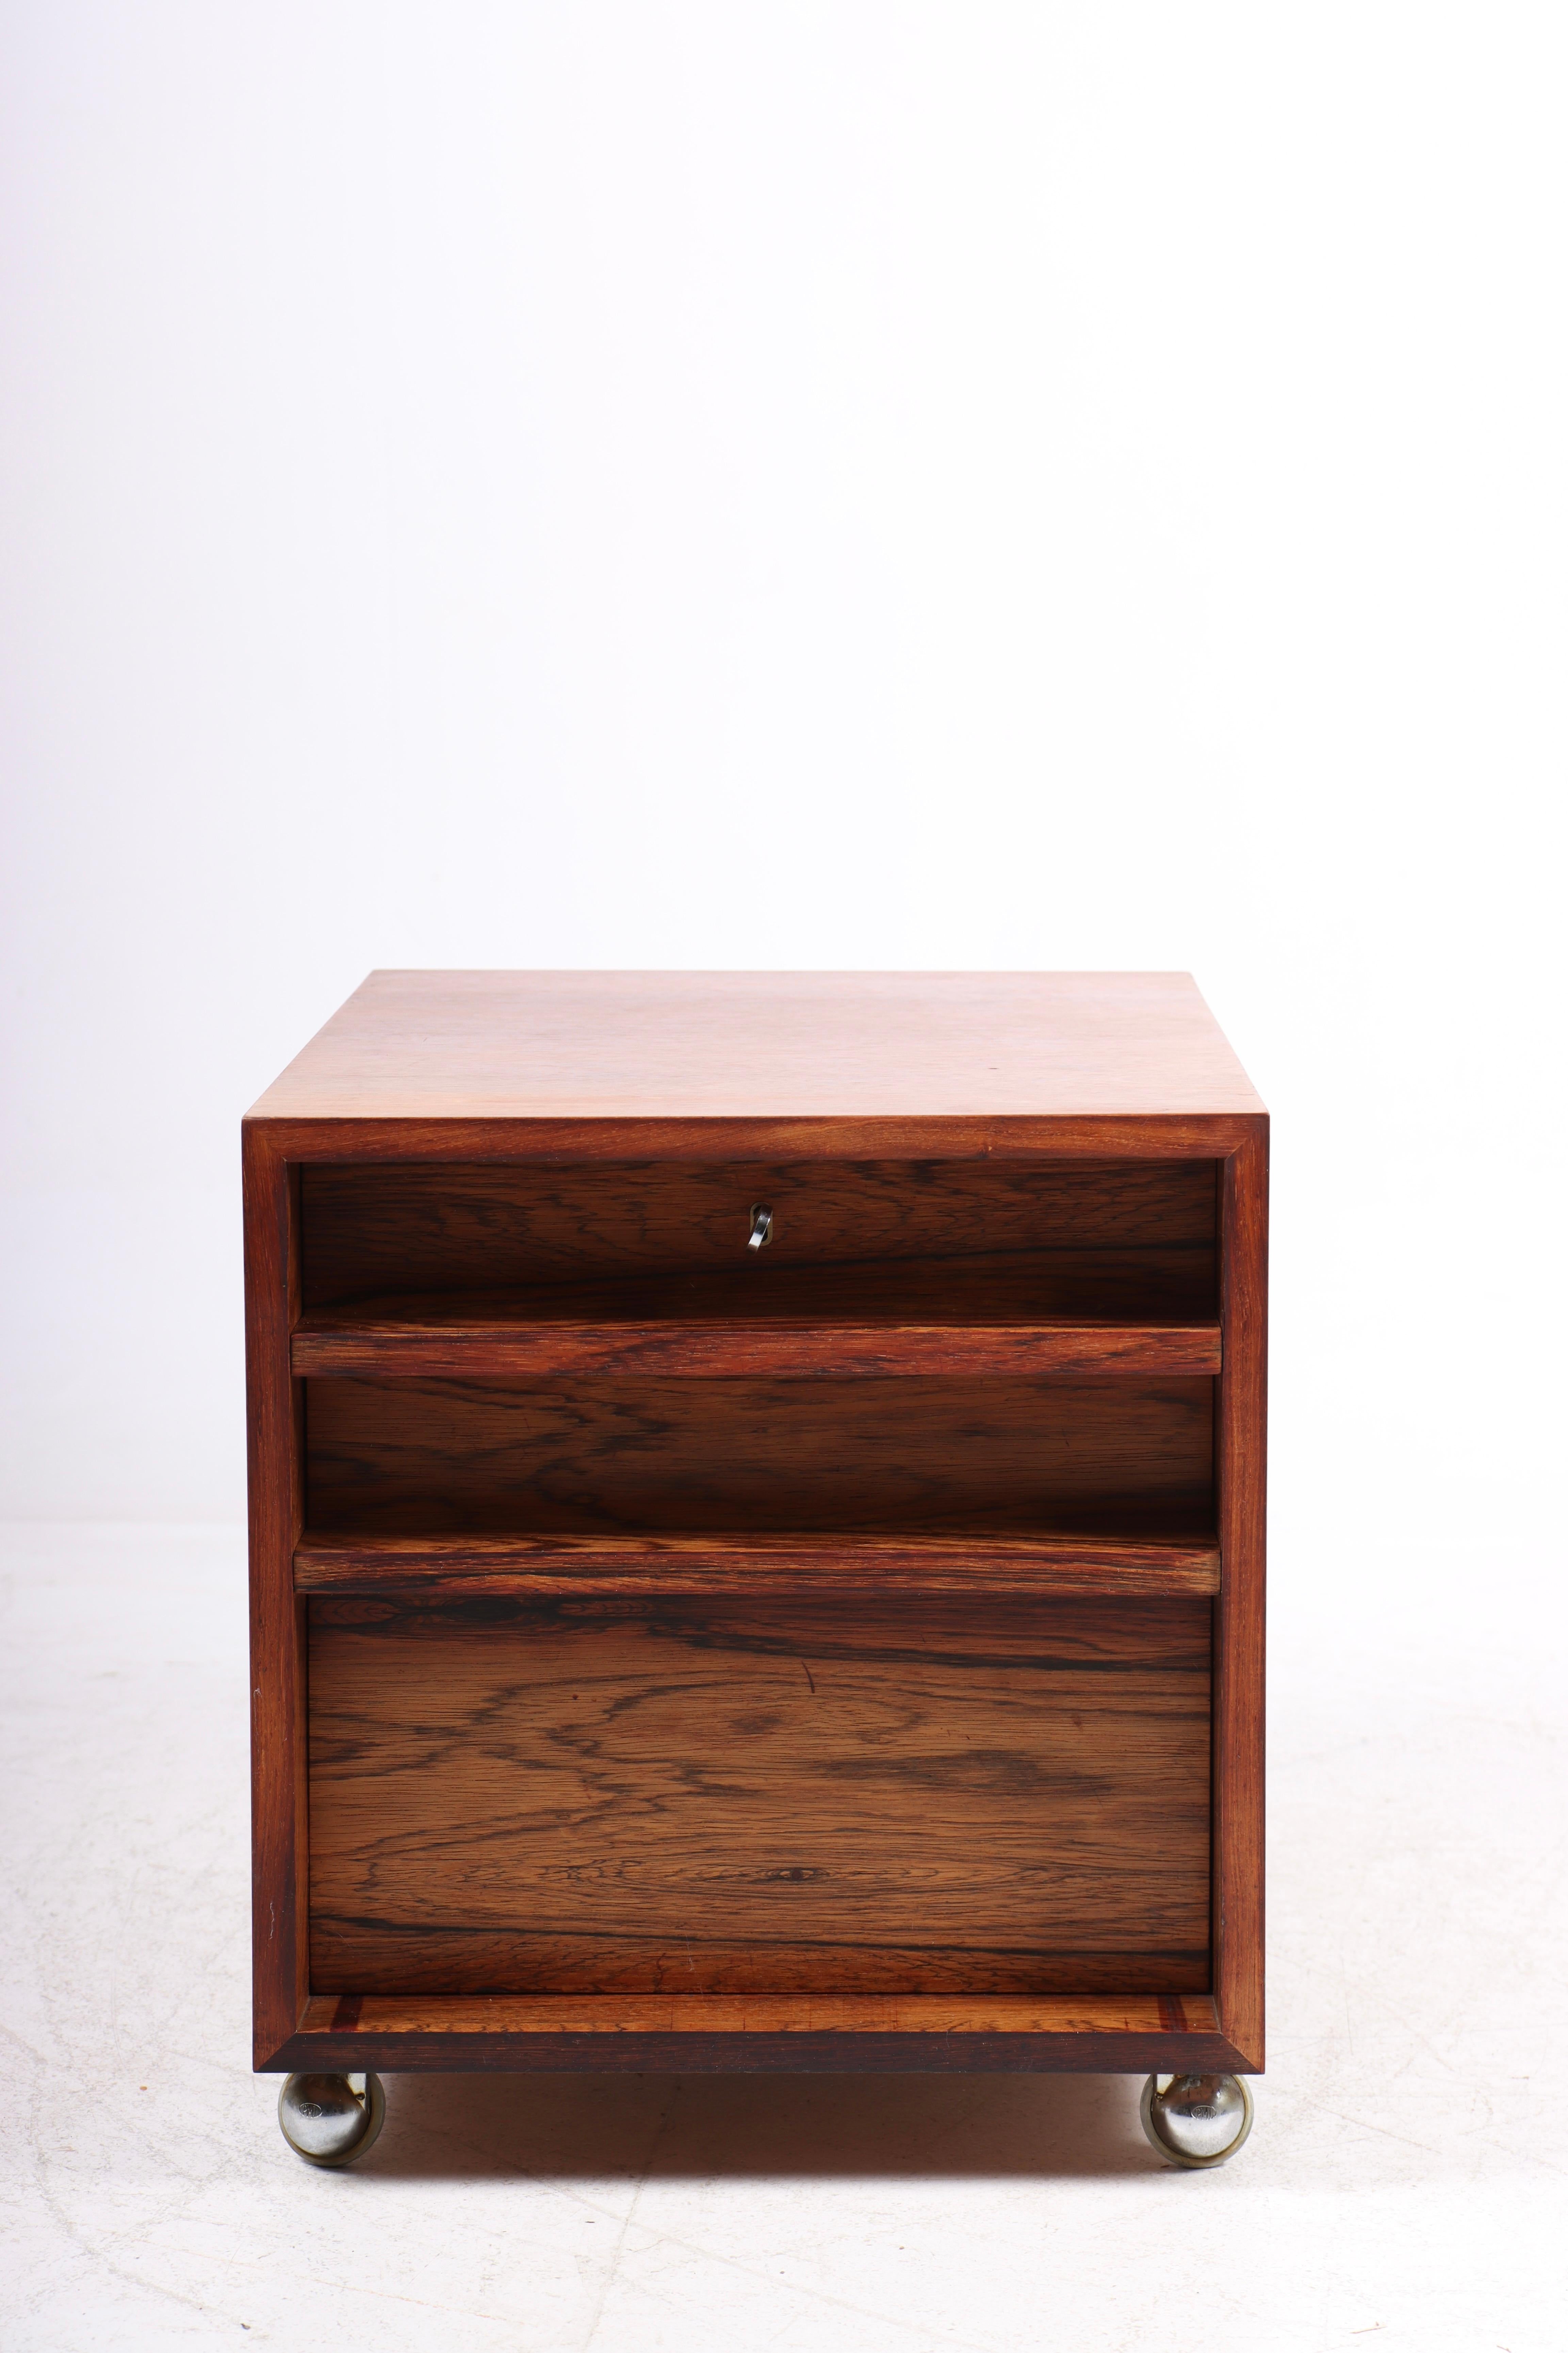 File cabinet in Rosewood, designed by Bodil Kjaer and made by E. Pedersen & Søn. Great original condition.
